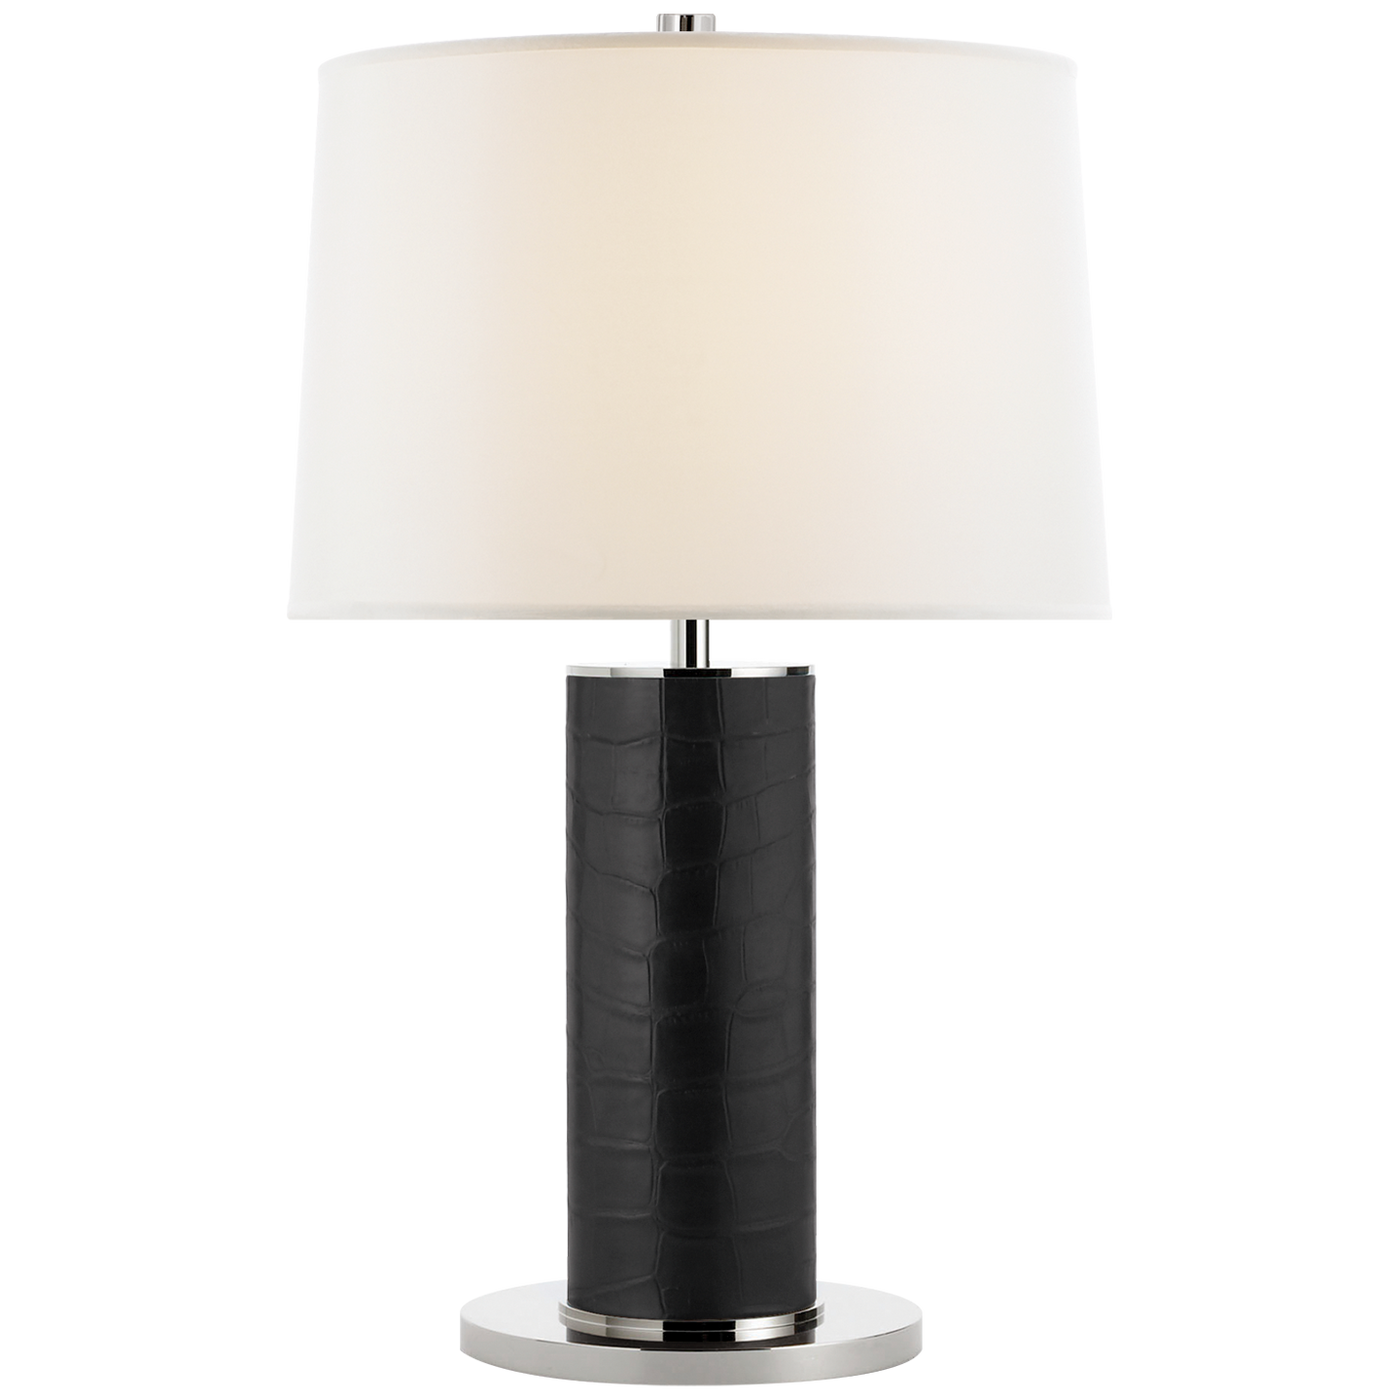 TABLE LAMP BLACK FAUX CROC & POLISHED NICKEL